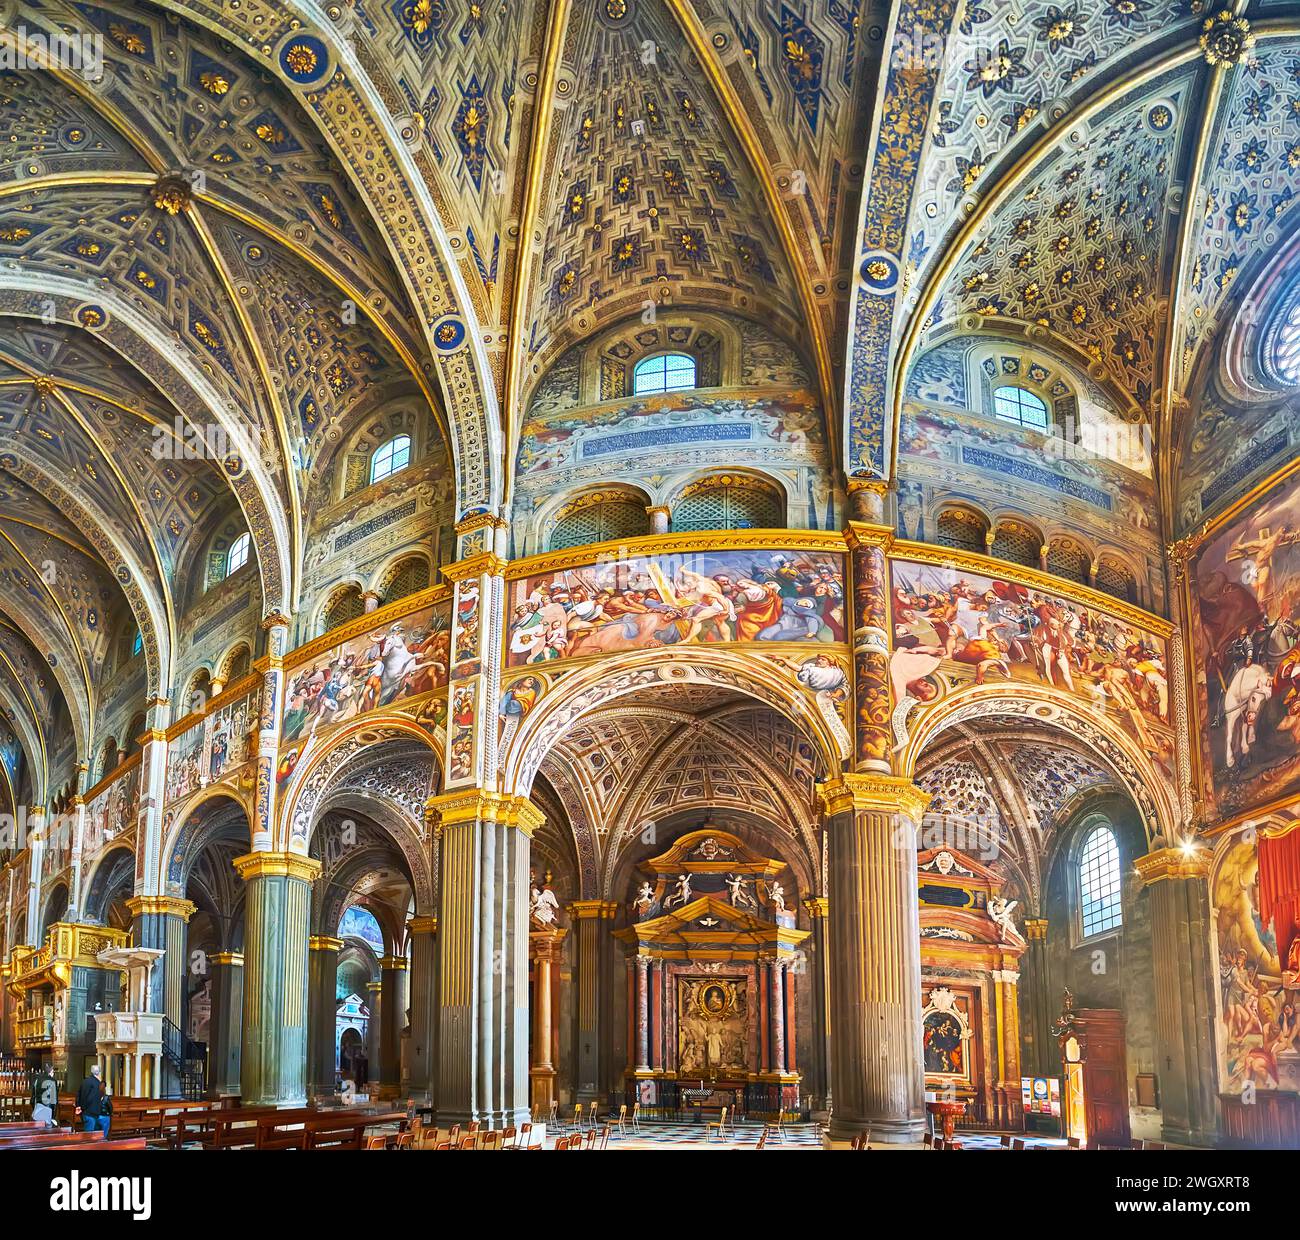 CREMONA, ITALY - APRIL 6, 2022: The frescoed interior of medieval Santa Maria Assunta Cathedral with tall walls, columns, arcades and rib-vaulted ceil Stock Photo